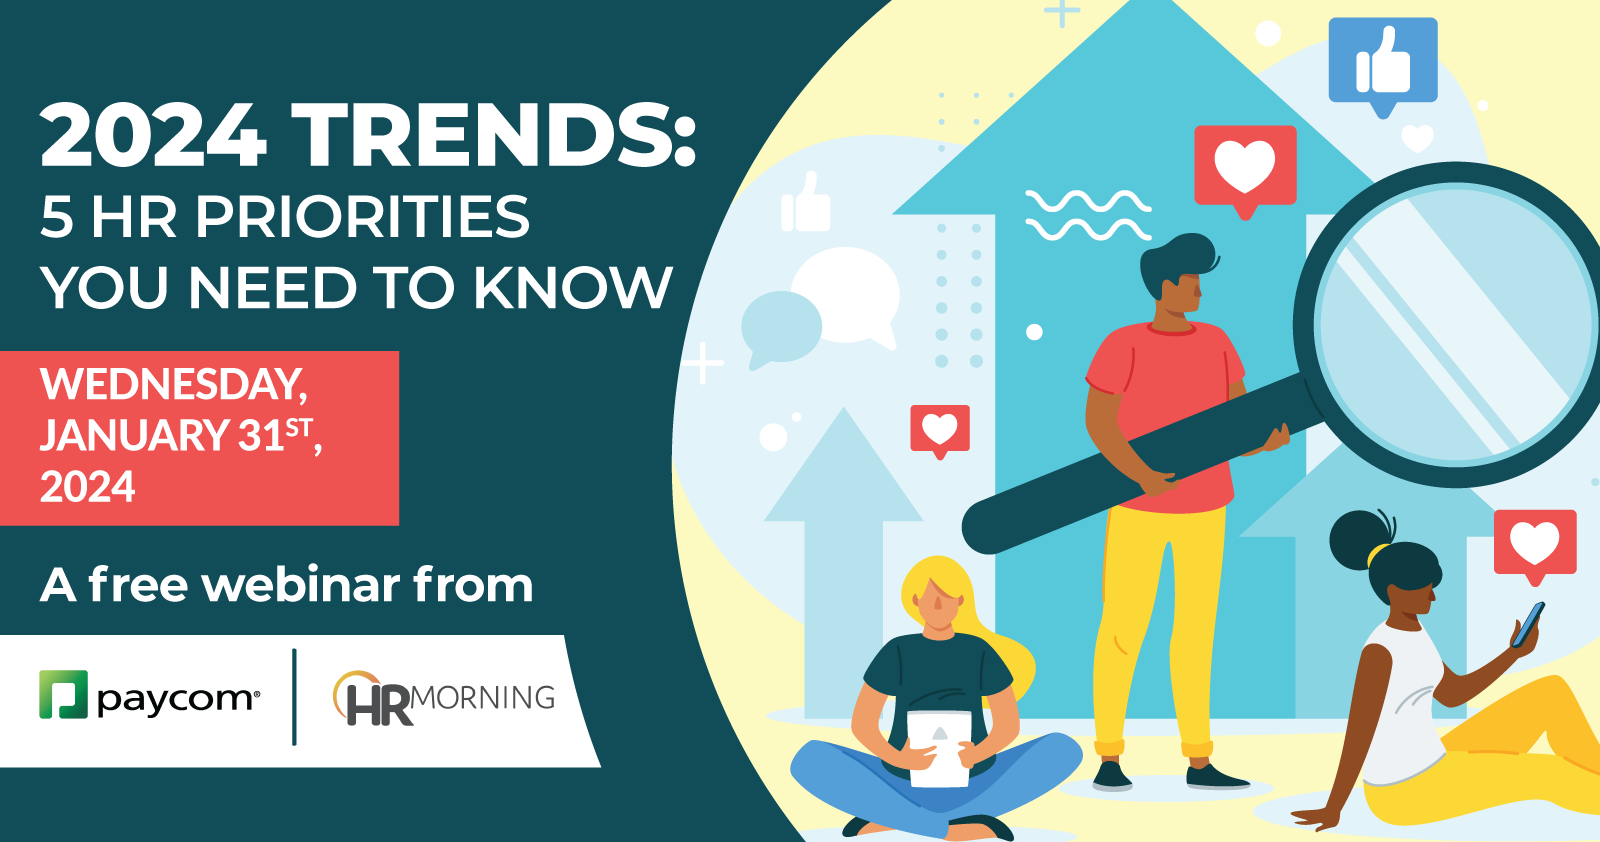 2024 Trends: 5 HR Priorities You Need to Know